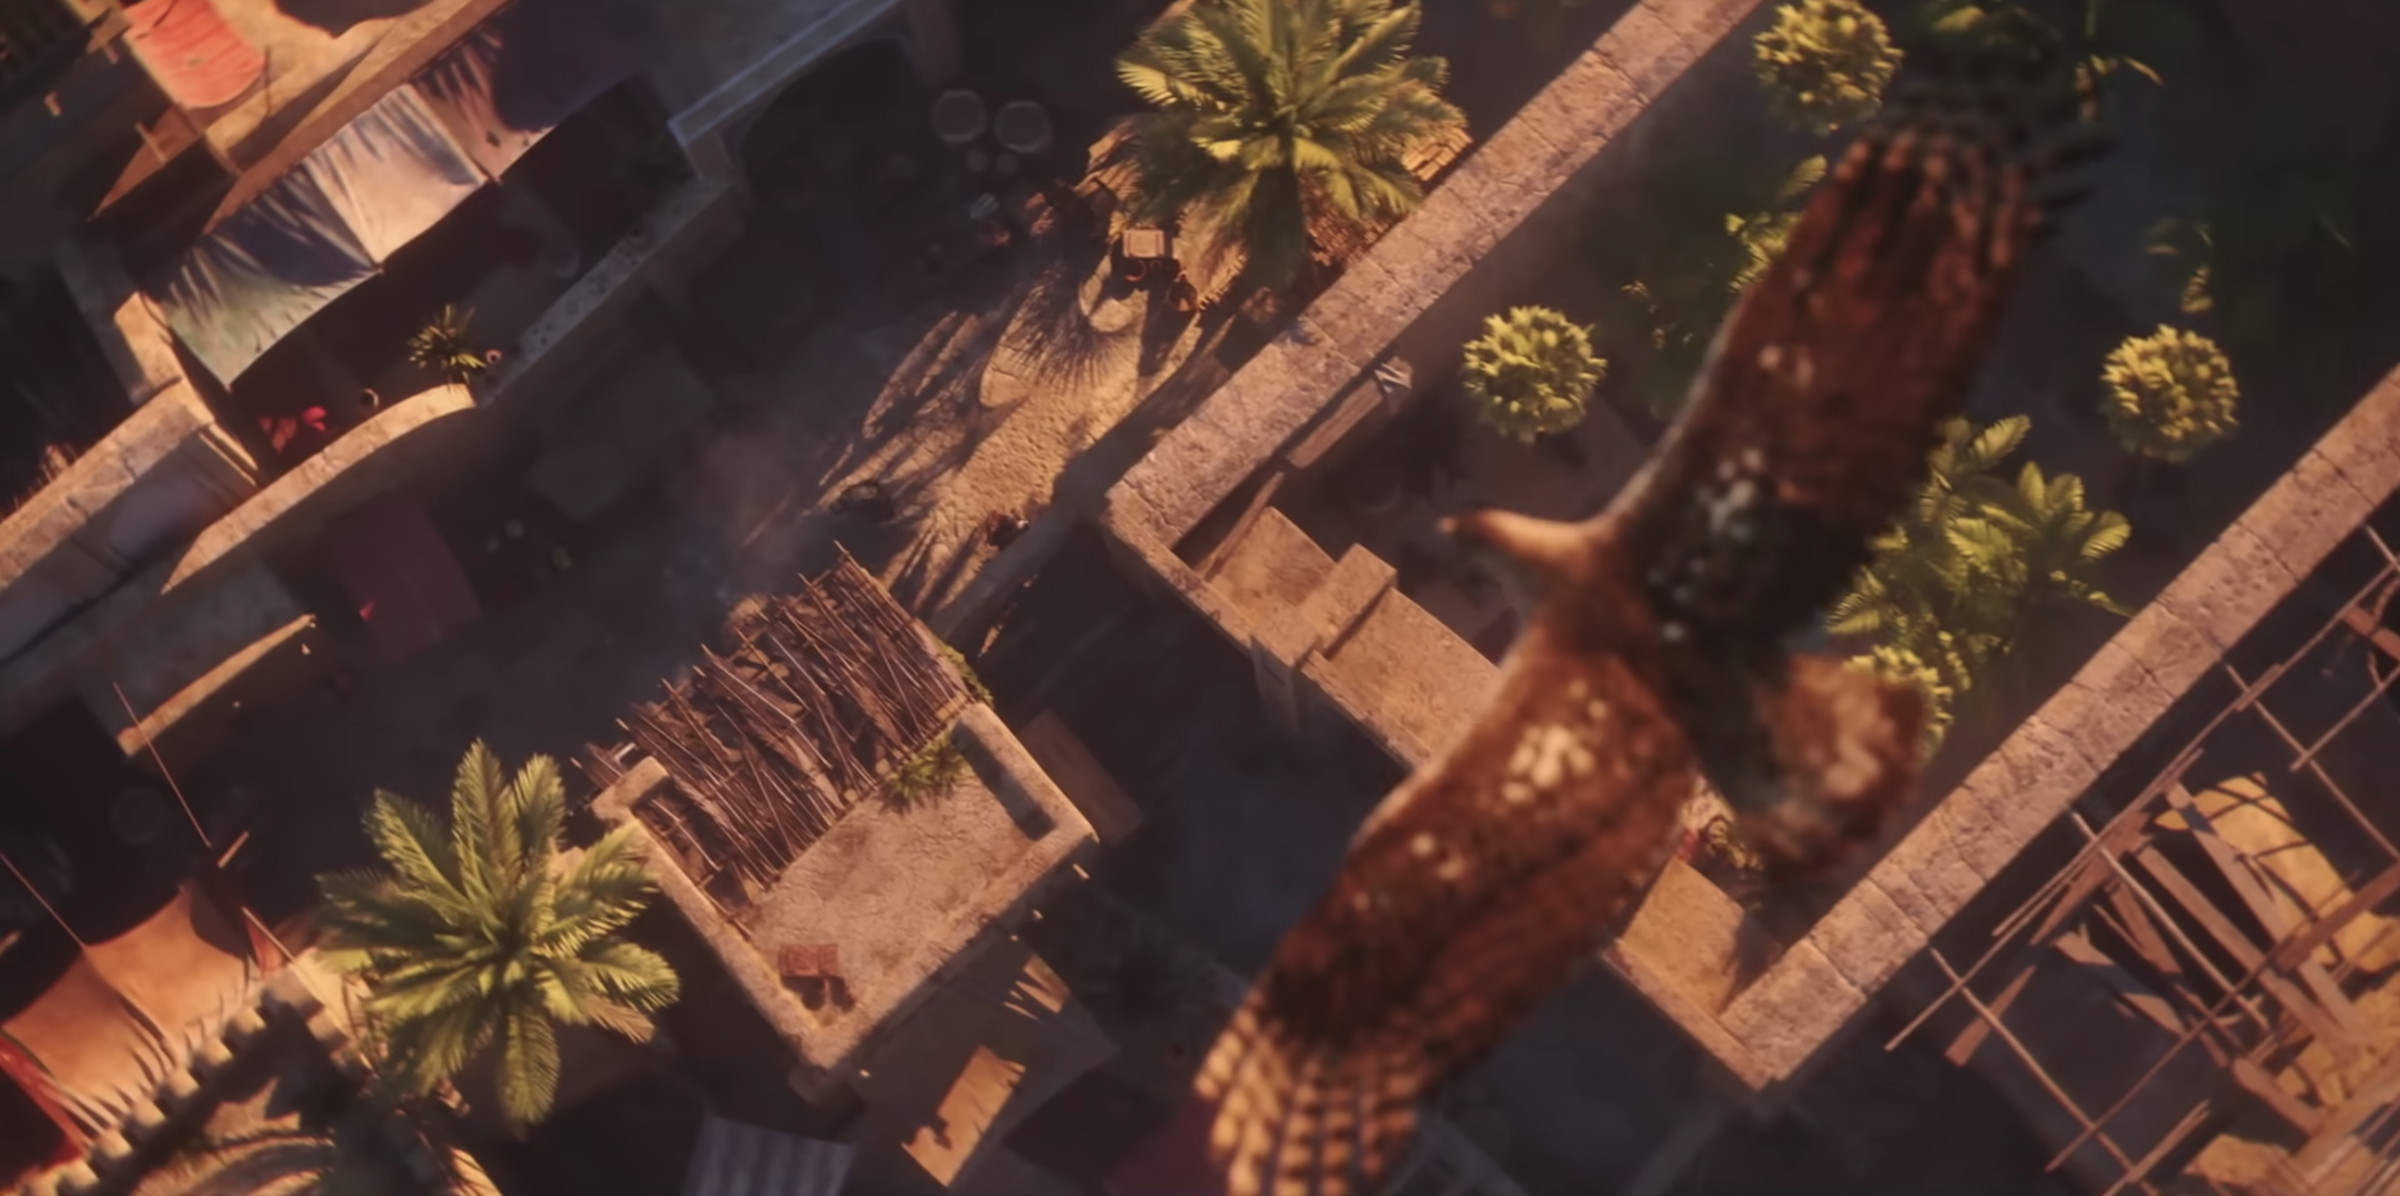 Screenshot from Assassin’s Creed Mirage cinematic trailer featuring an aerial view of 9th century Baghdad from the perspective of your eagle companion Enkidu.